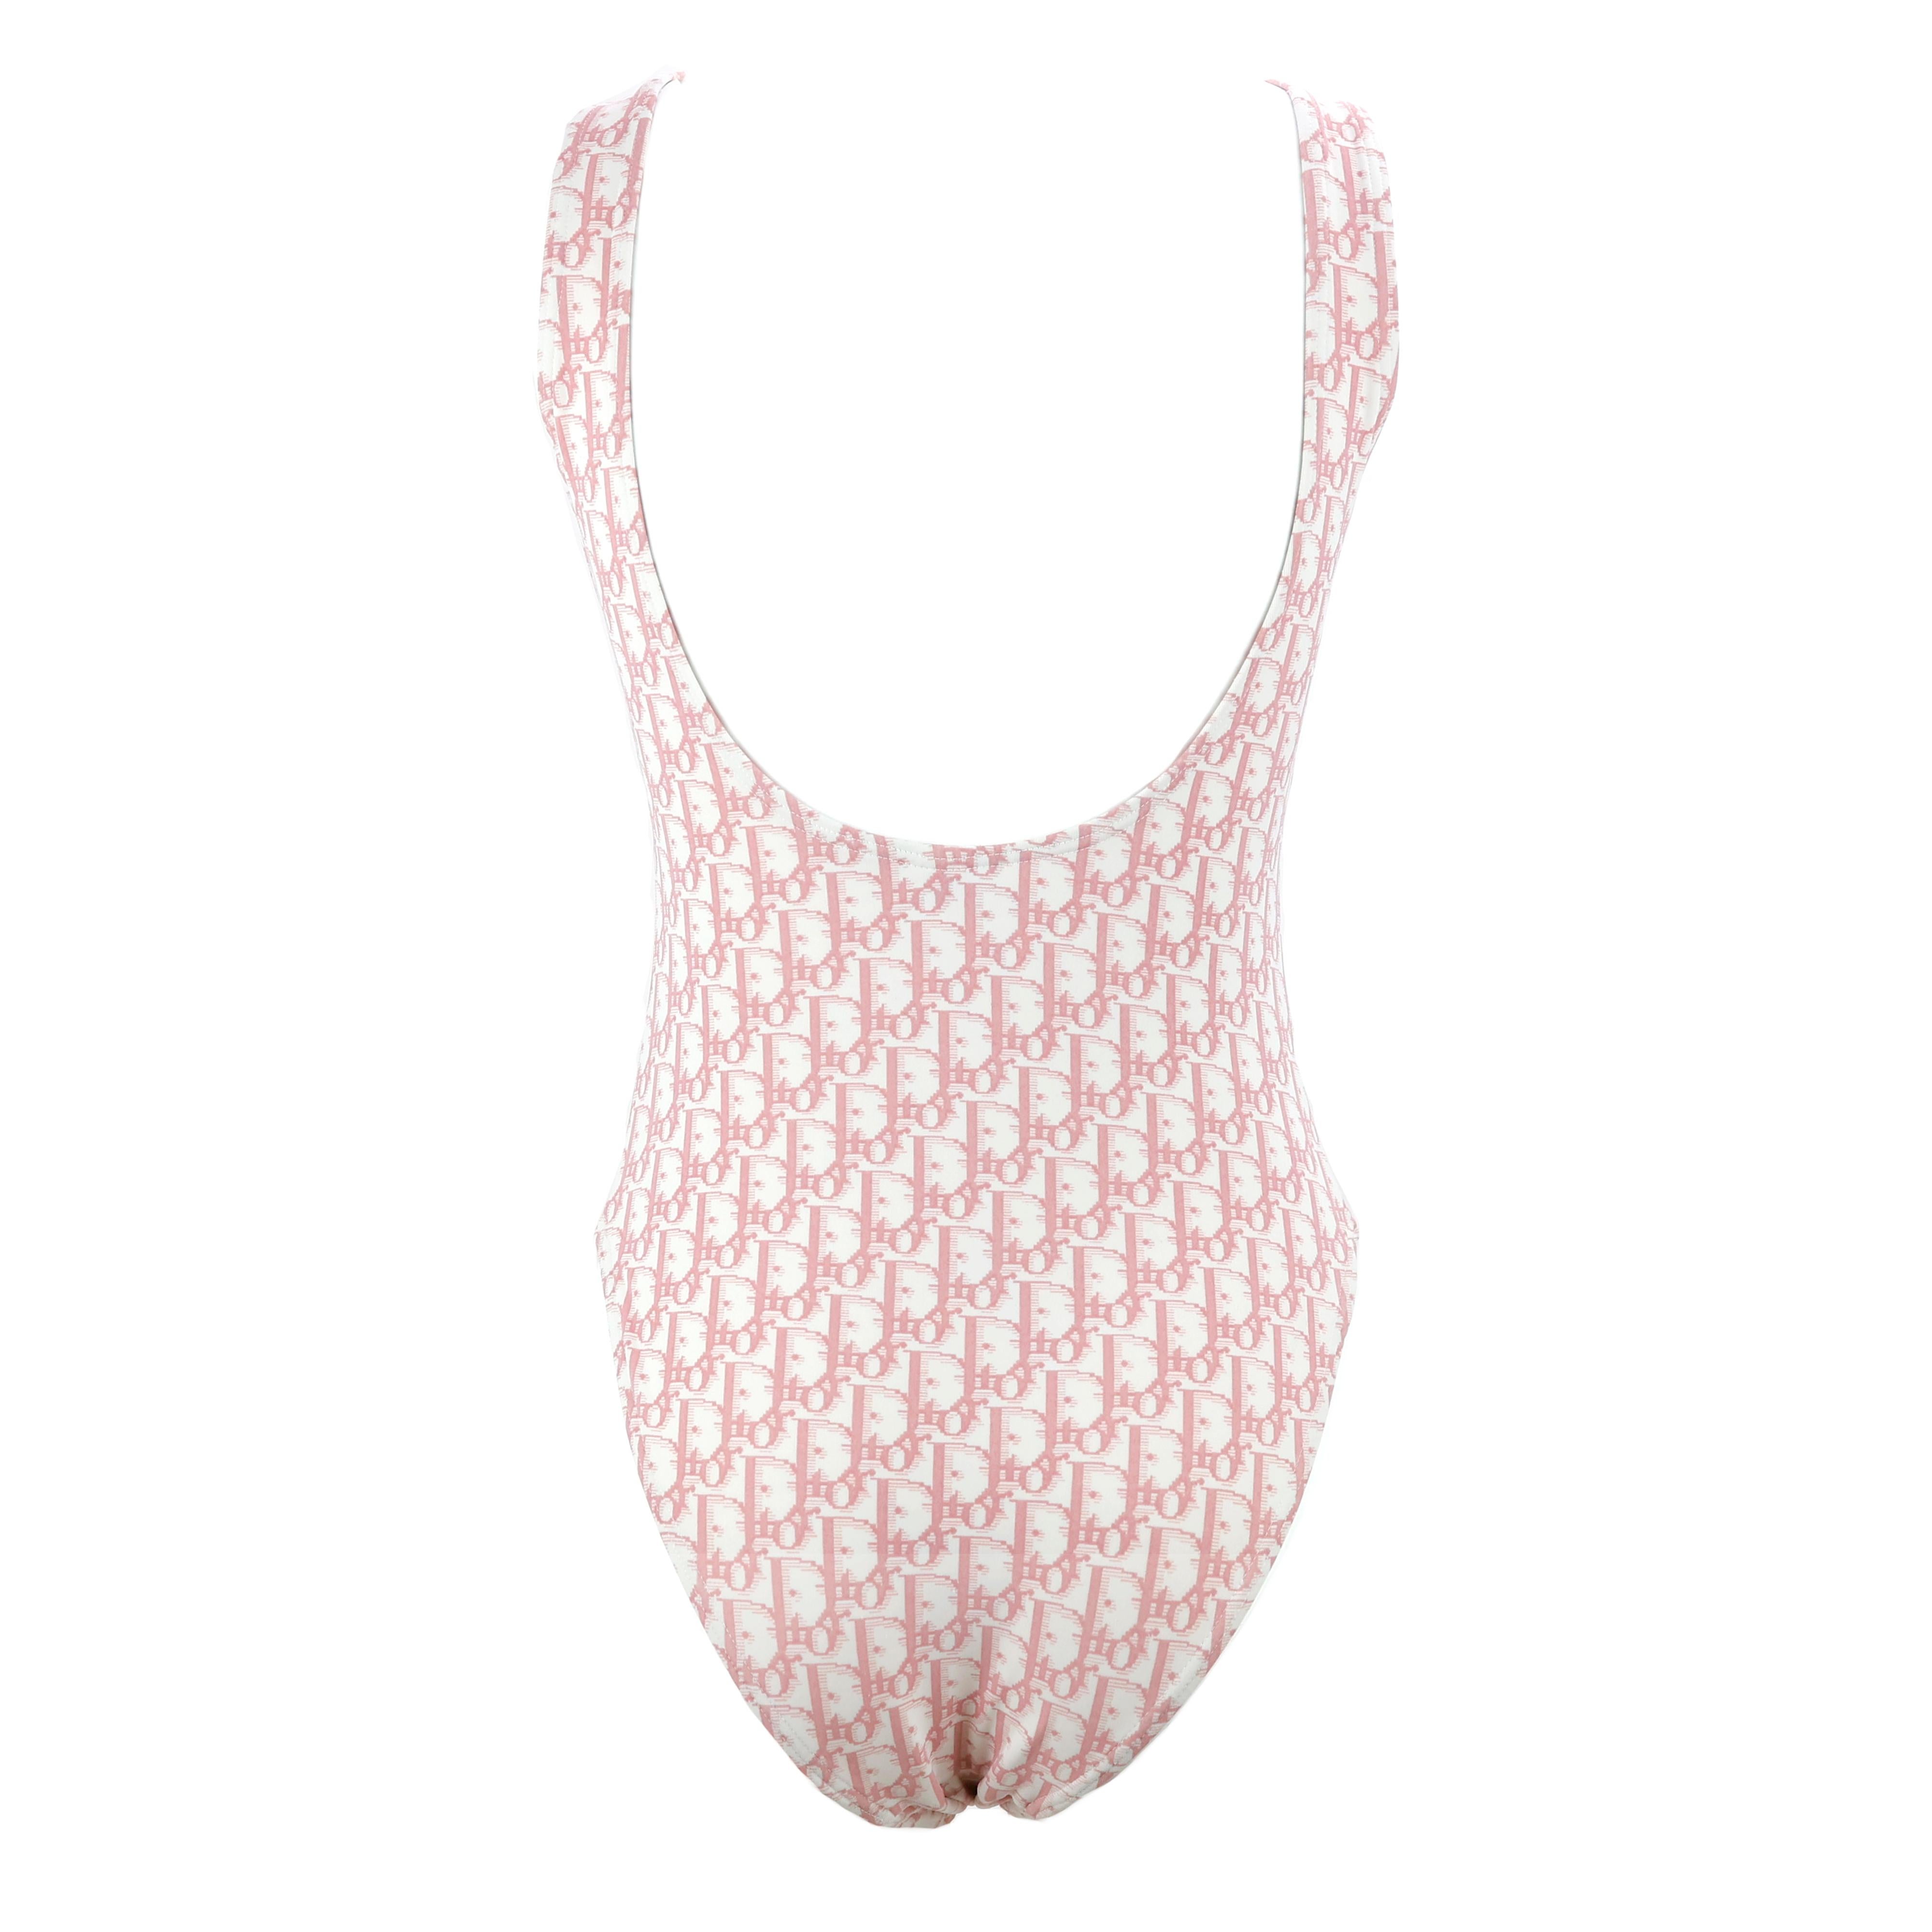 Dior one-piece swimsuit in pink oblique monogram with Dior logo in mini crystals, size M.

Condition:
Excellent.